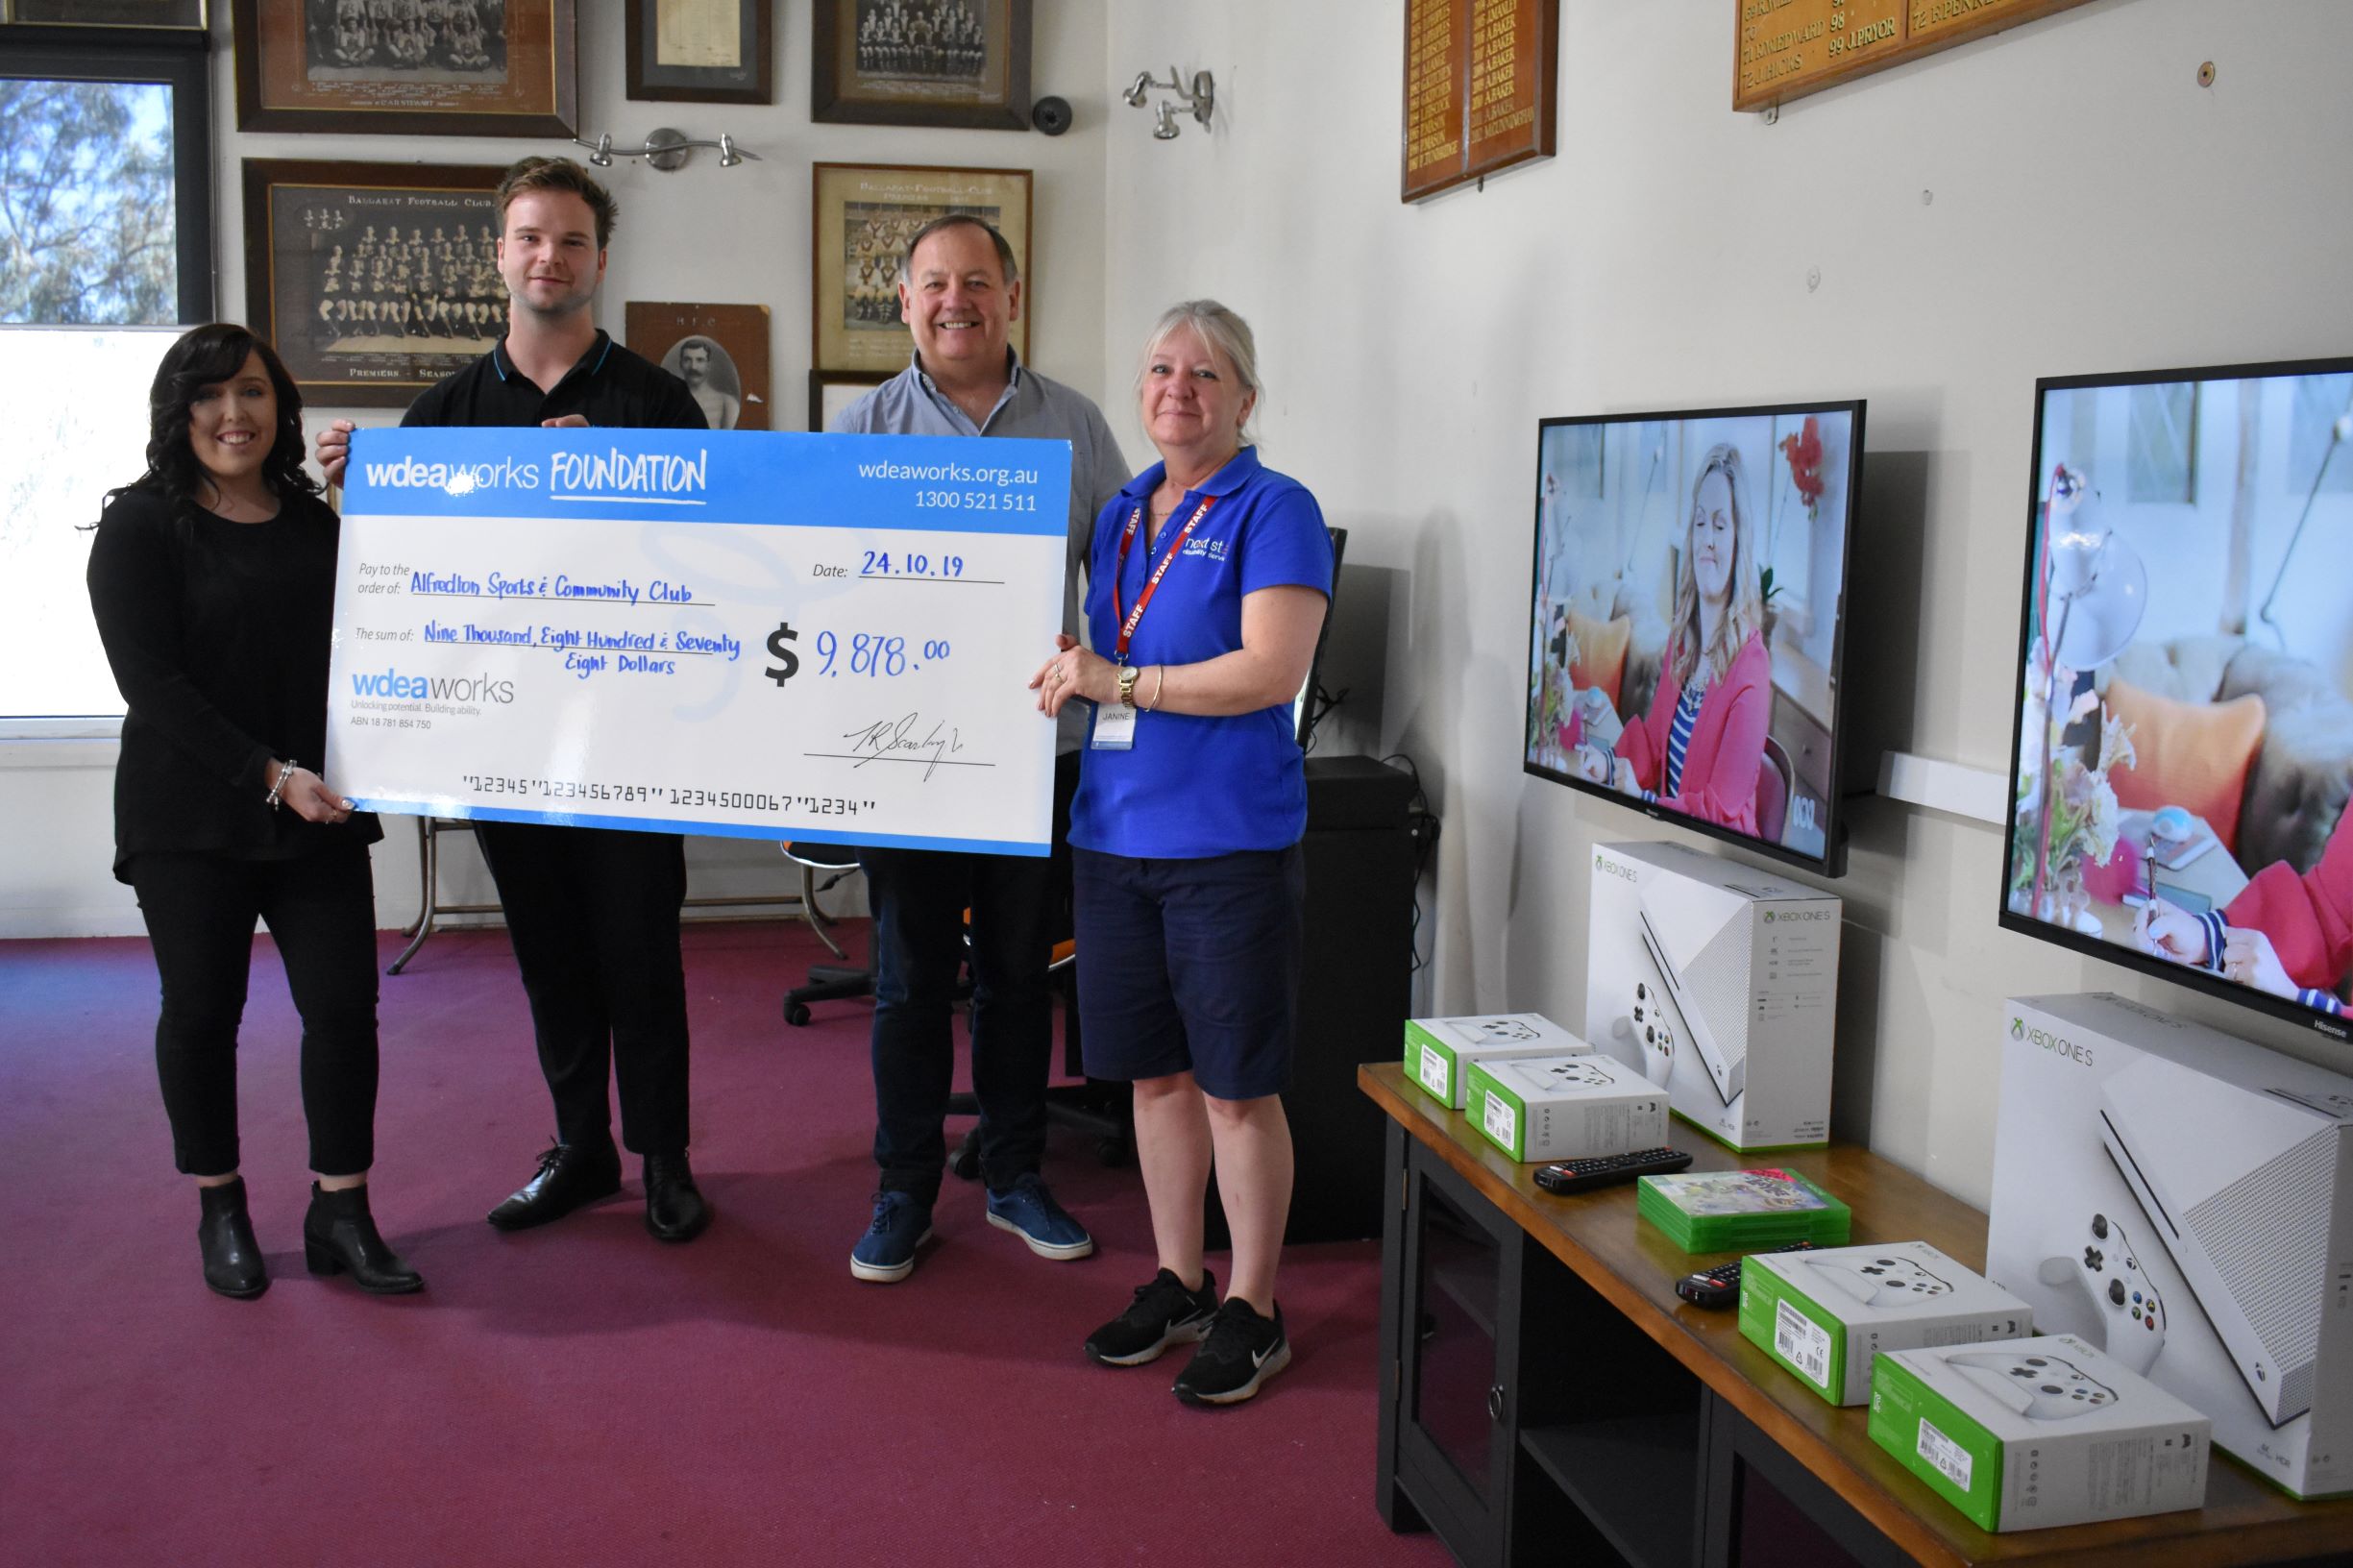 WDEA Works Foundation Grant to support new skill development opportunities for Next Step Disability Services thanks to the Alfredton Sports & Community Club